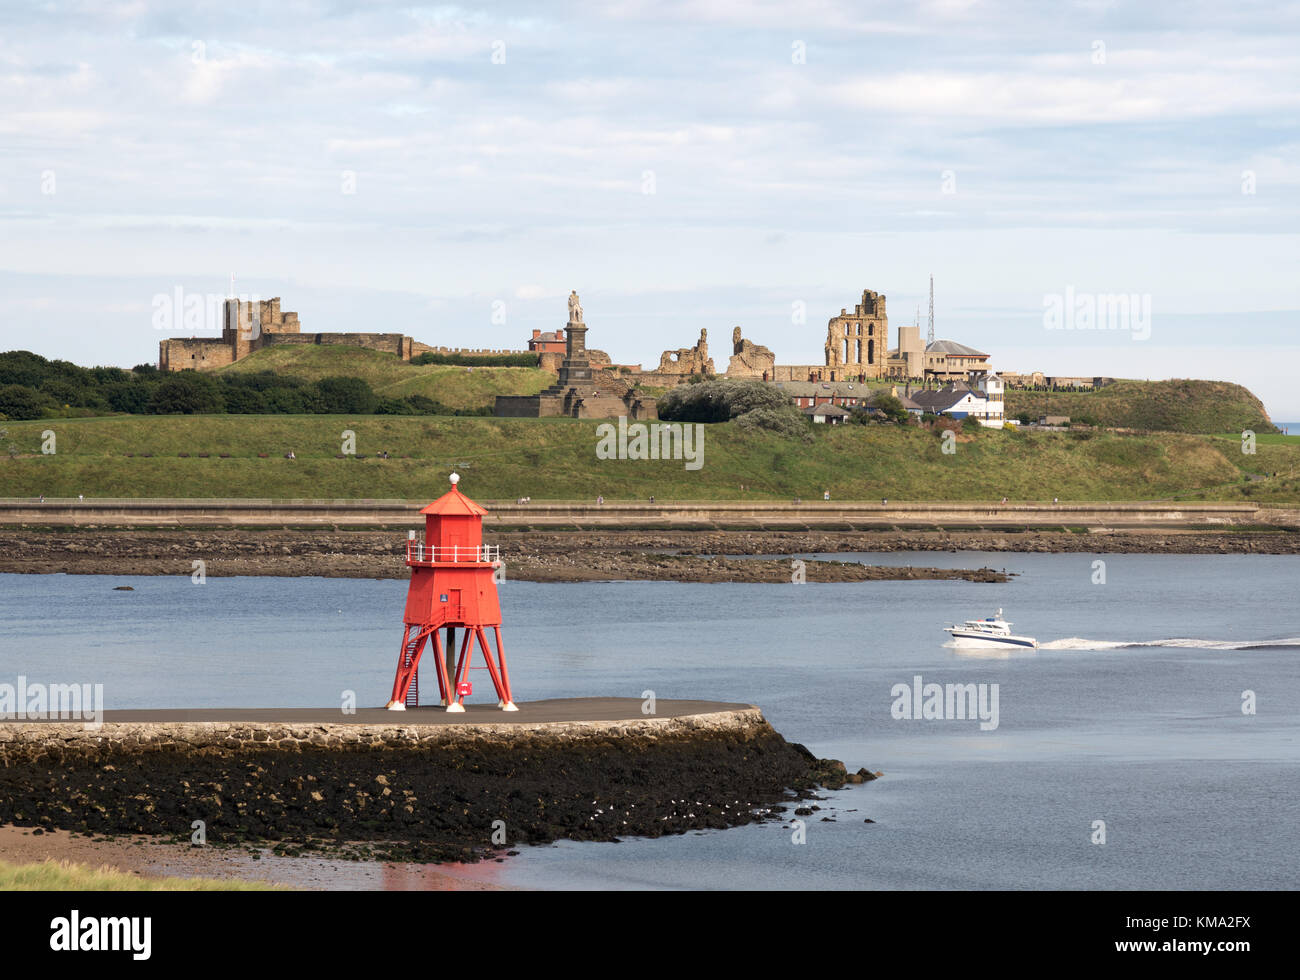 The Herd Groyne lighthouse South Shields looking across the Tyne estuary to Tynemouth, north east England, UK Stock Photo